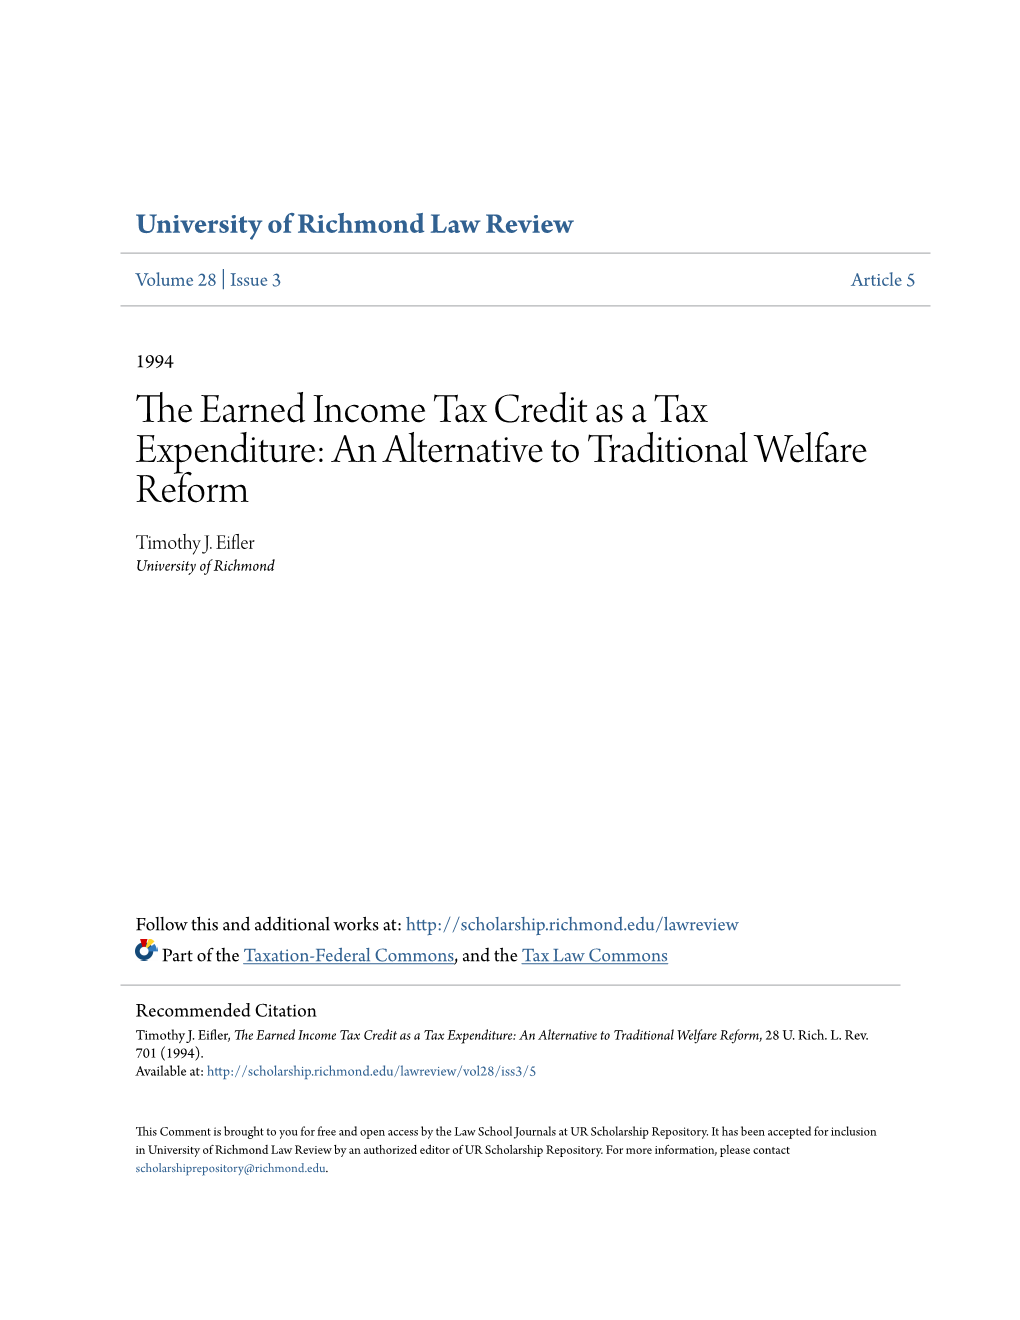 The Earned Income Tax Credit As a Tax Expenditure: an Alternative to Traditional Welfare Reform, 28 U